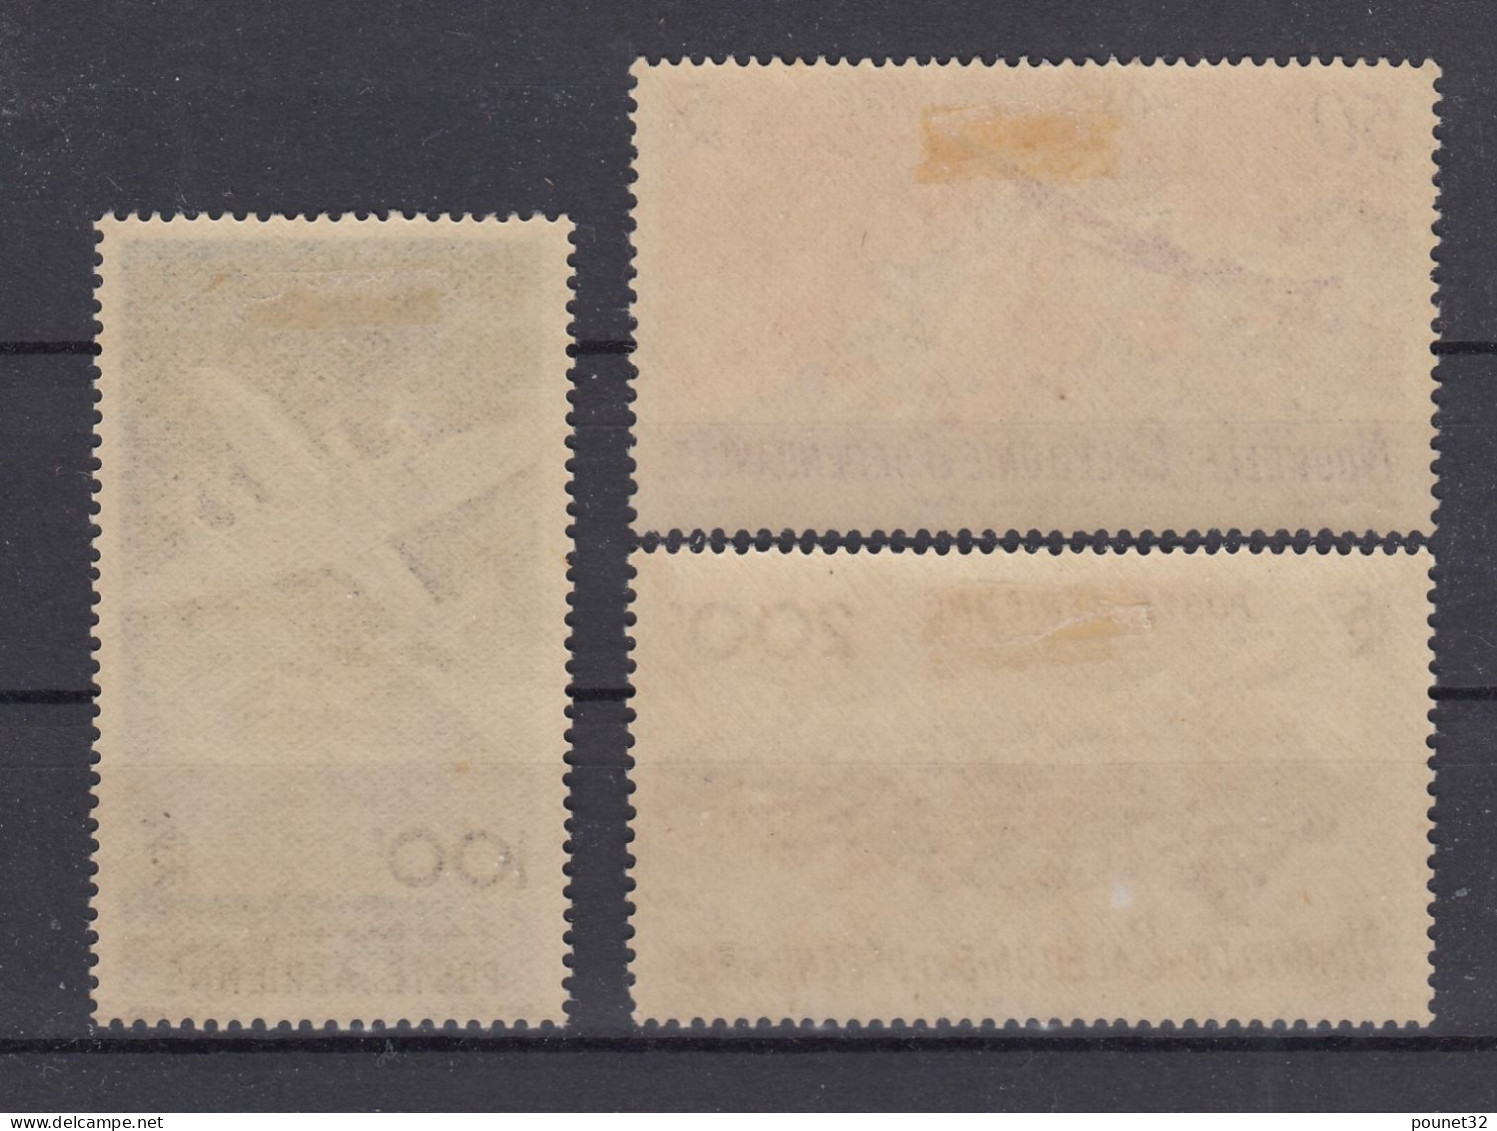 NLLE CALEDONIE POSTE AERIENNE SERIE N° 61/63 NEUVE * GOMME TRACE DE CHARNIERE - Unused Stamps